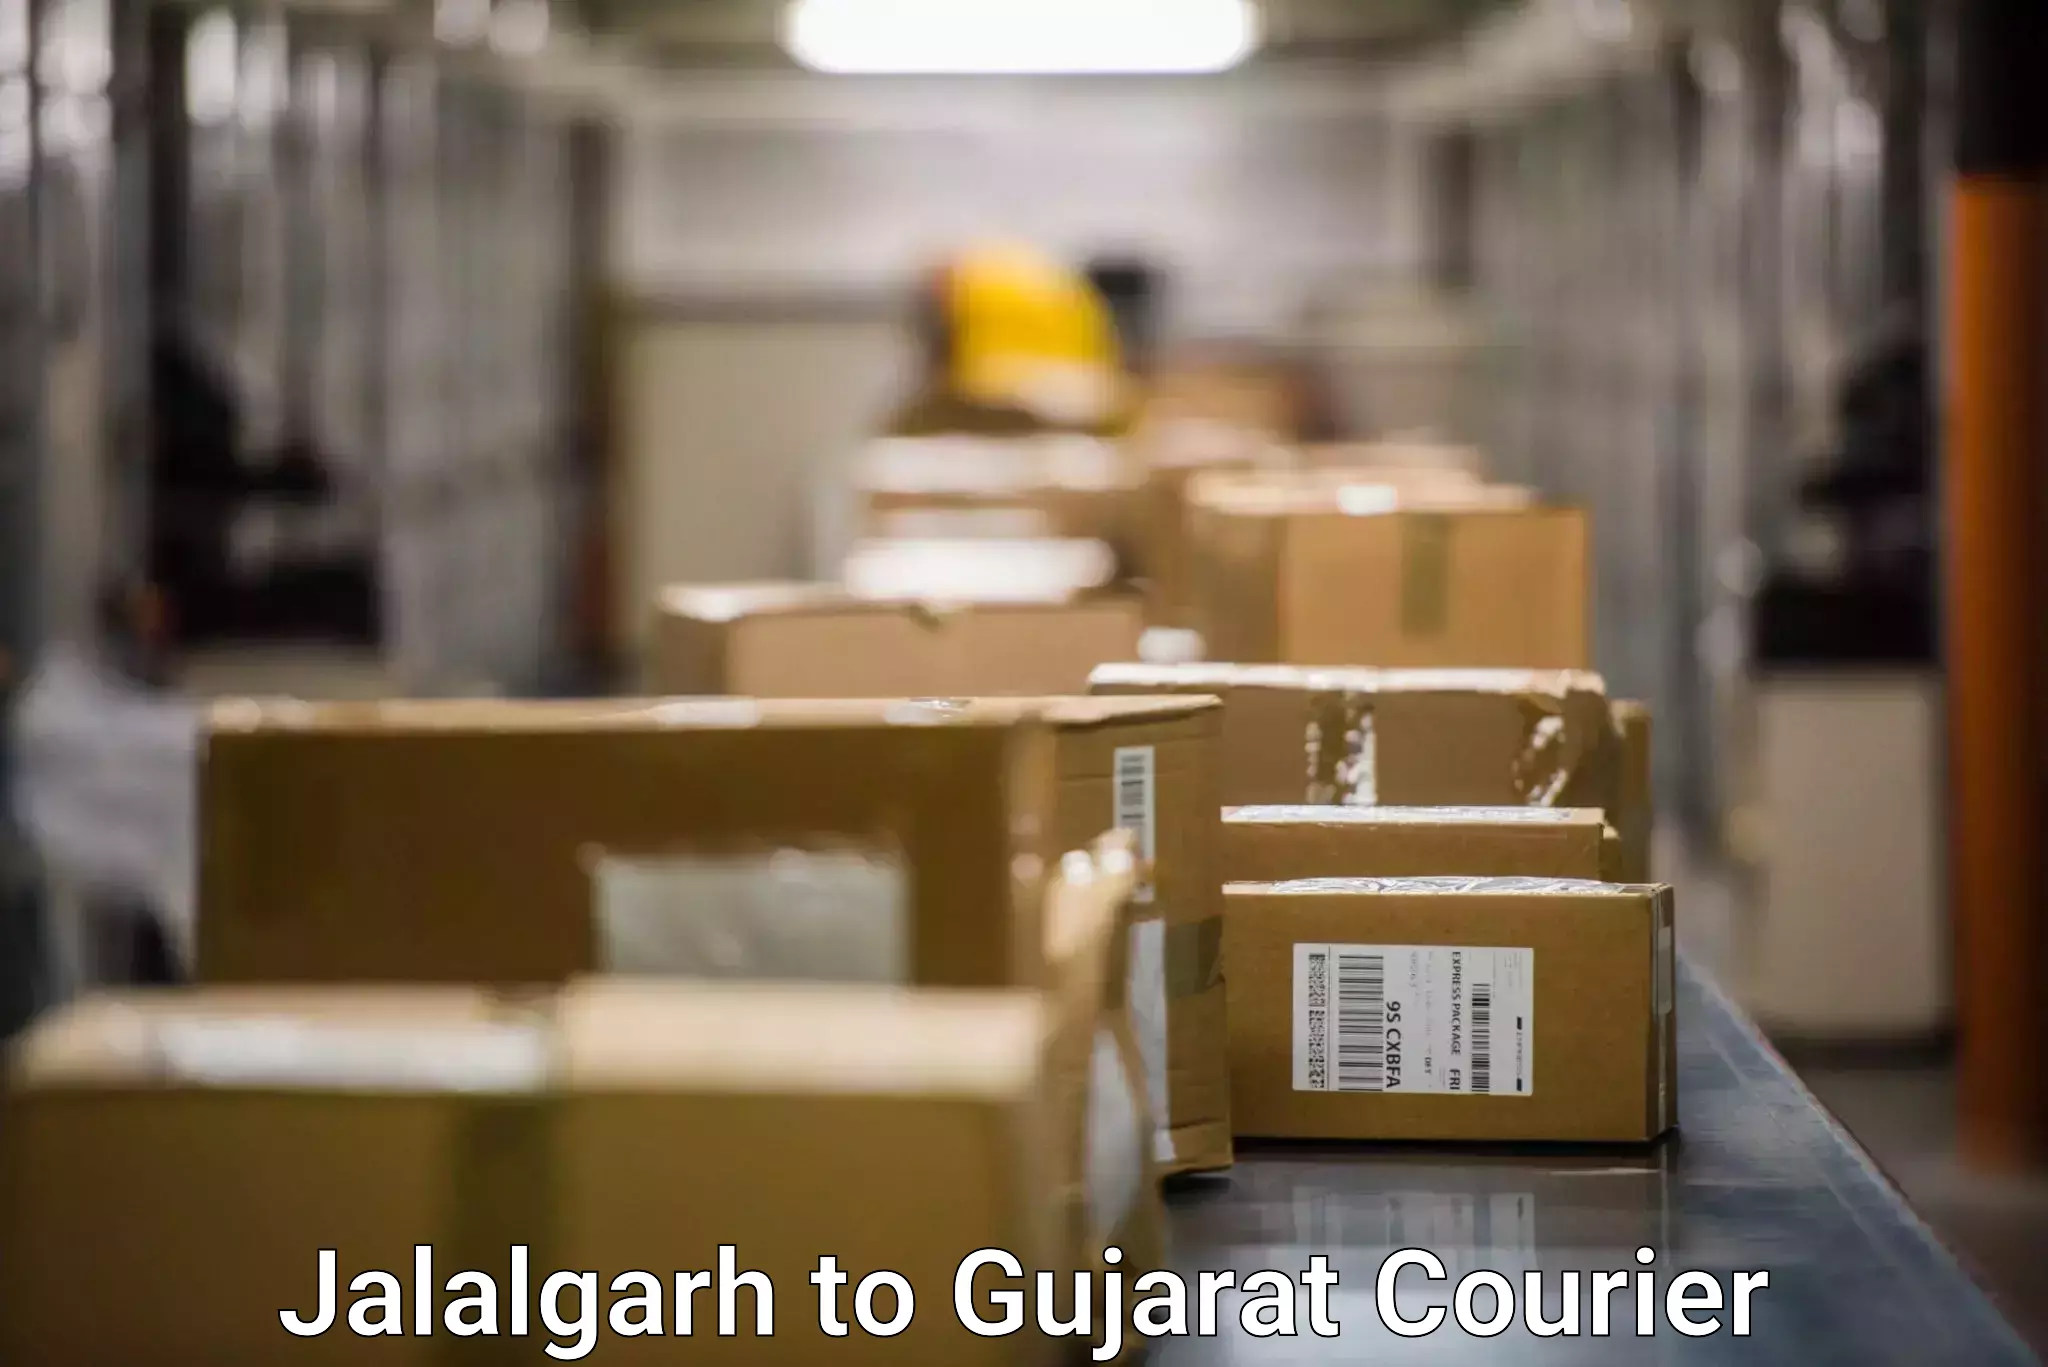 State-of-the-art courier technology Jalalgarh to Bopal